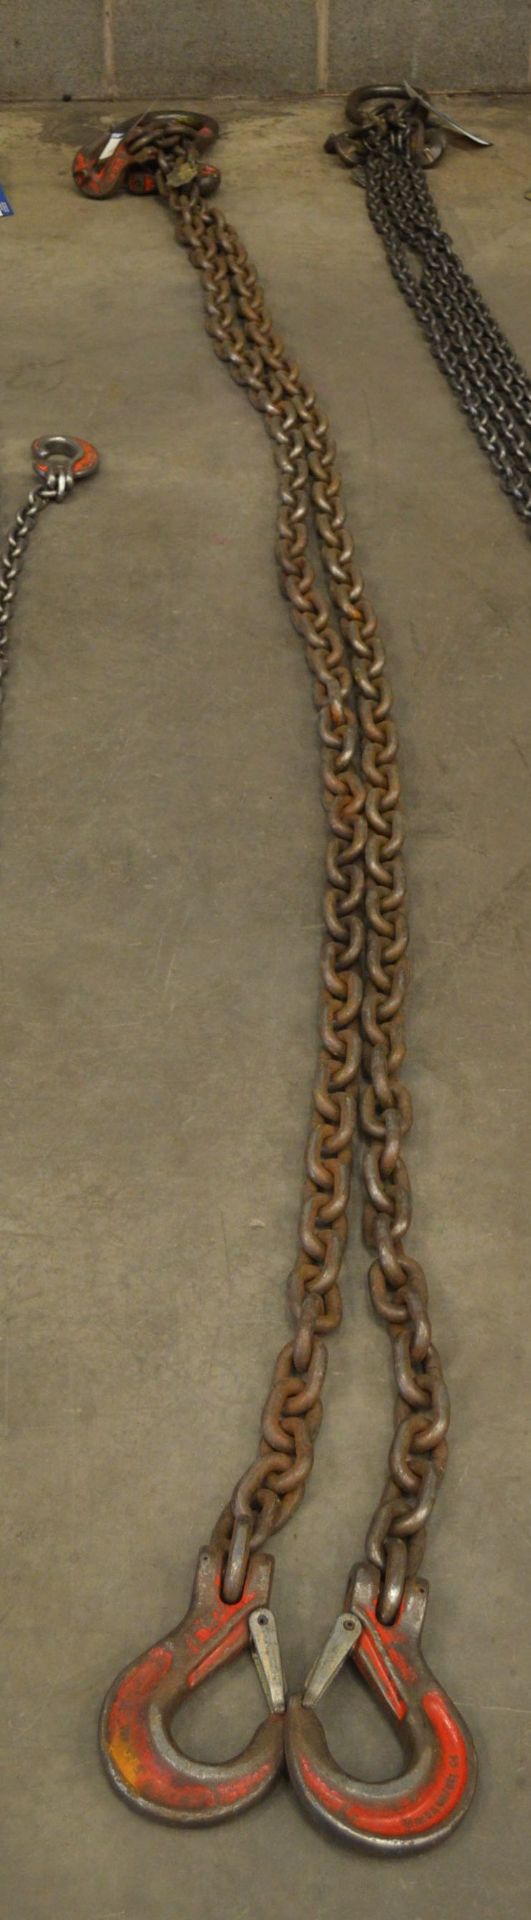 Weissemfels Two Leg Chain Sling, approx. 3.7m long, with tensioners